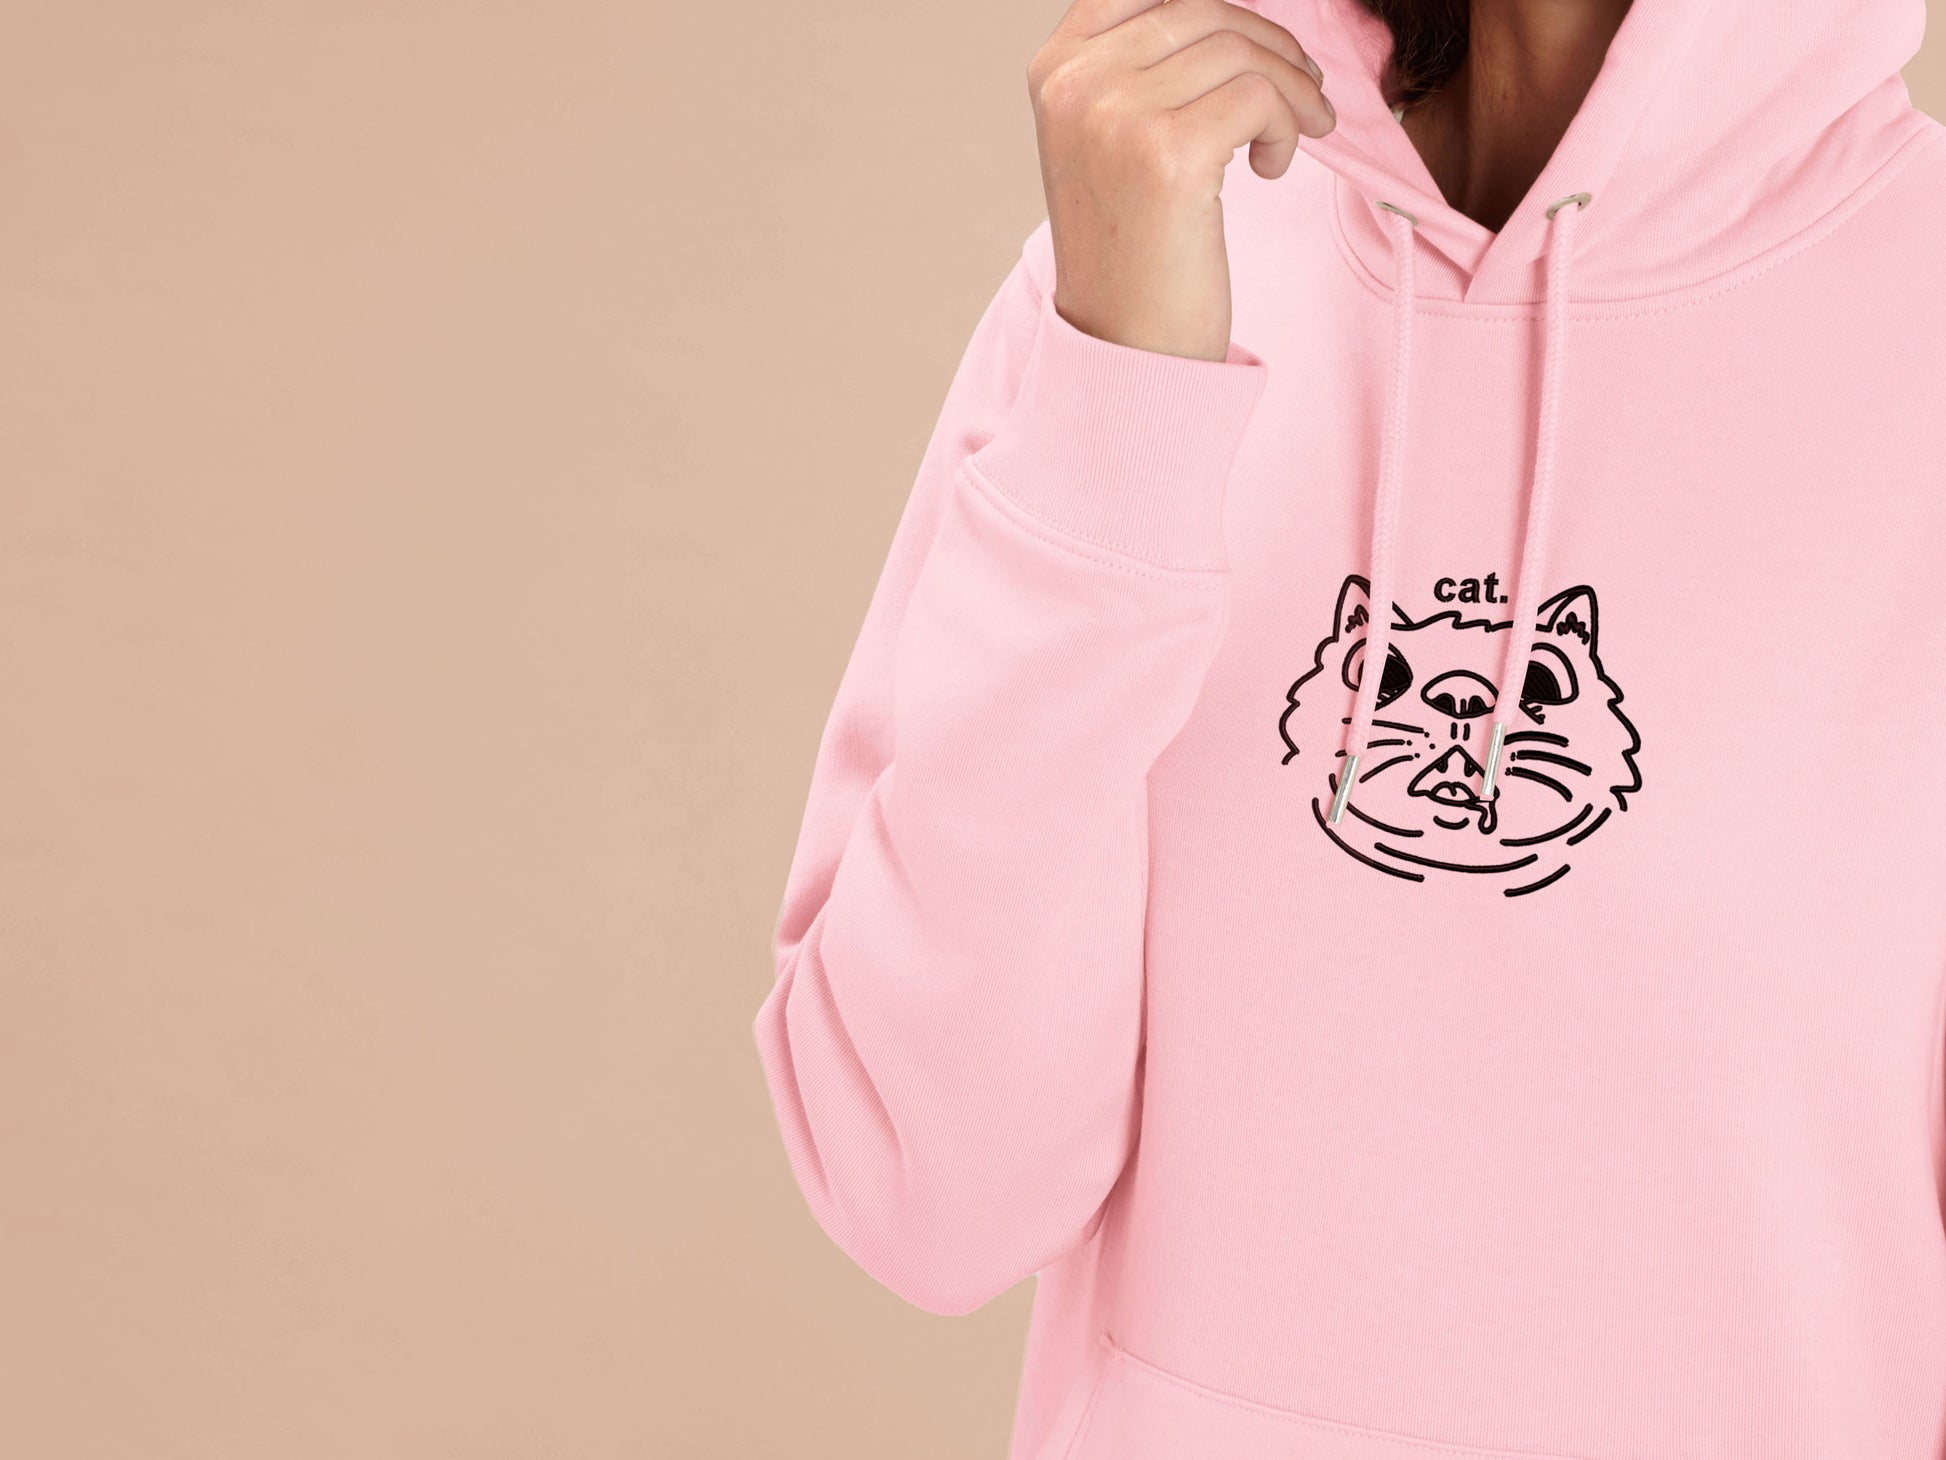 Woman wearing a long sleeved pink fleece hoodie with an Embroidered cat design